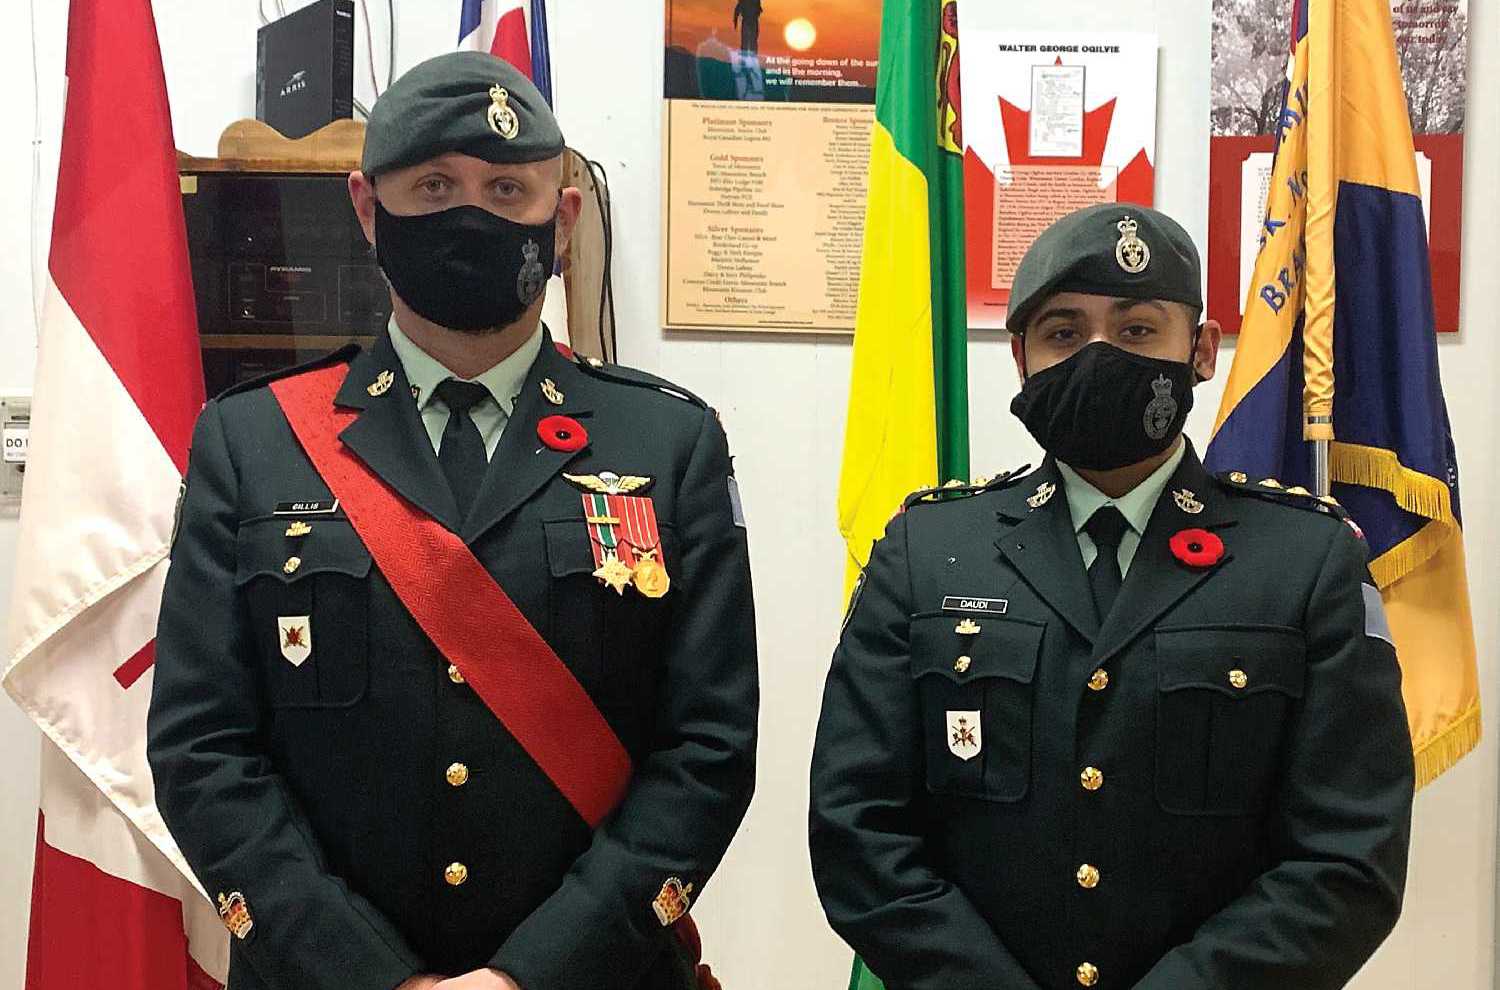 Warrant Officer Christopher Gillis and Captain Zain Daudi are members of the Princess Patricias Canadian Light Infantry (PPCLI).  Both soldiers talk about why the annual Remembrance Day march in Moosomin is significant to them. Left: Warrant Officer Christopher Gillis and Captain Zain Daudi are members of the Princess Patricias Canadian Light Infantry.